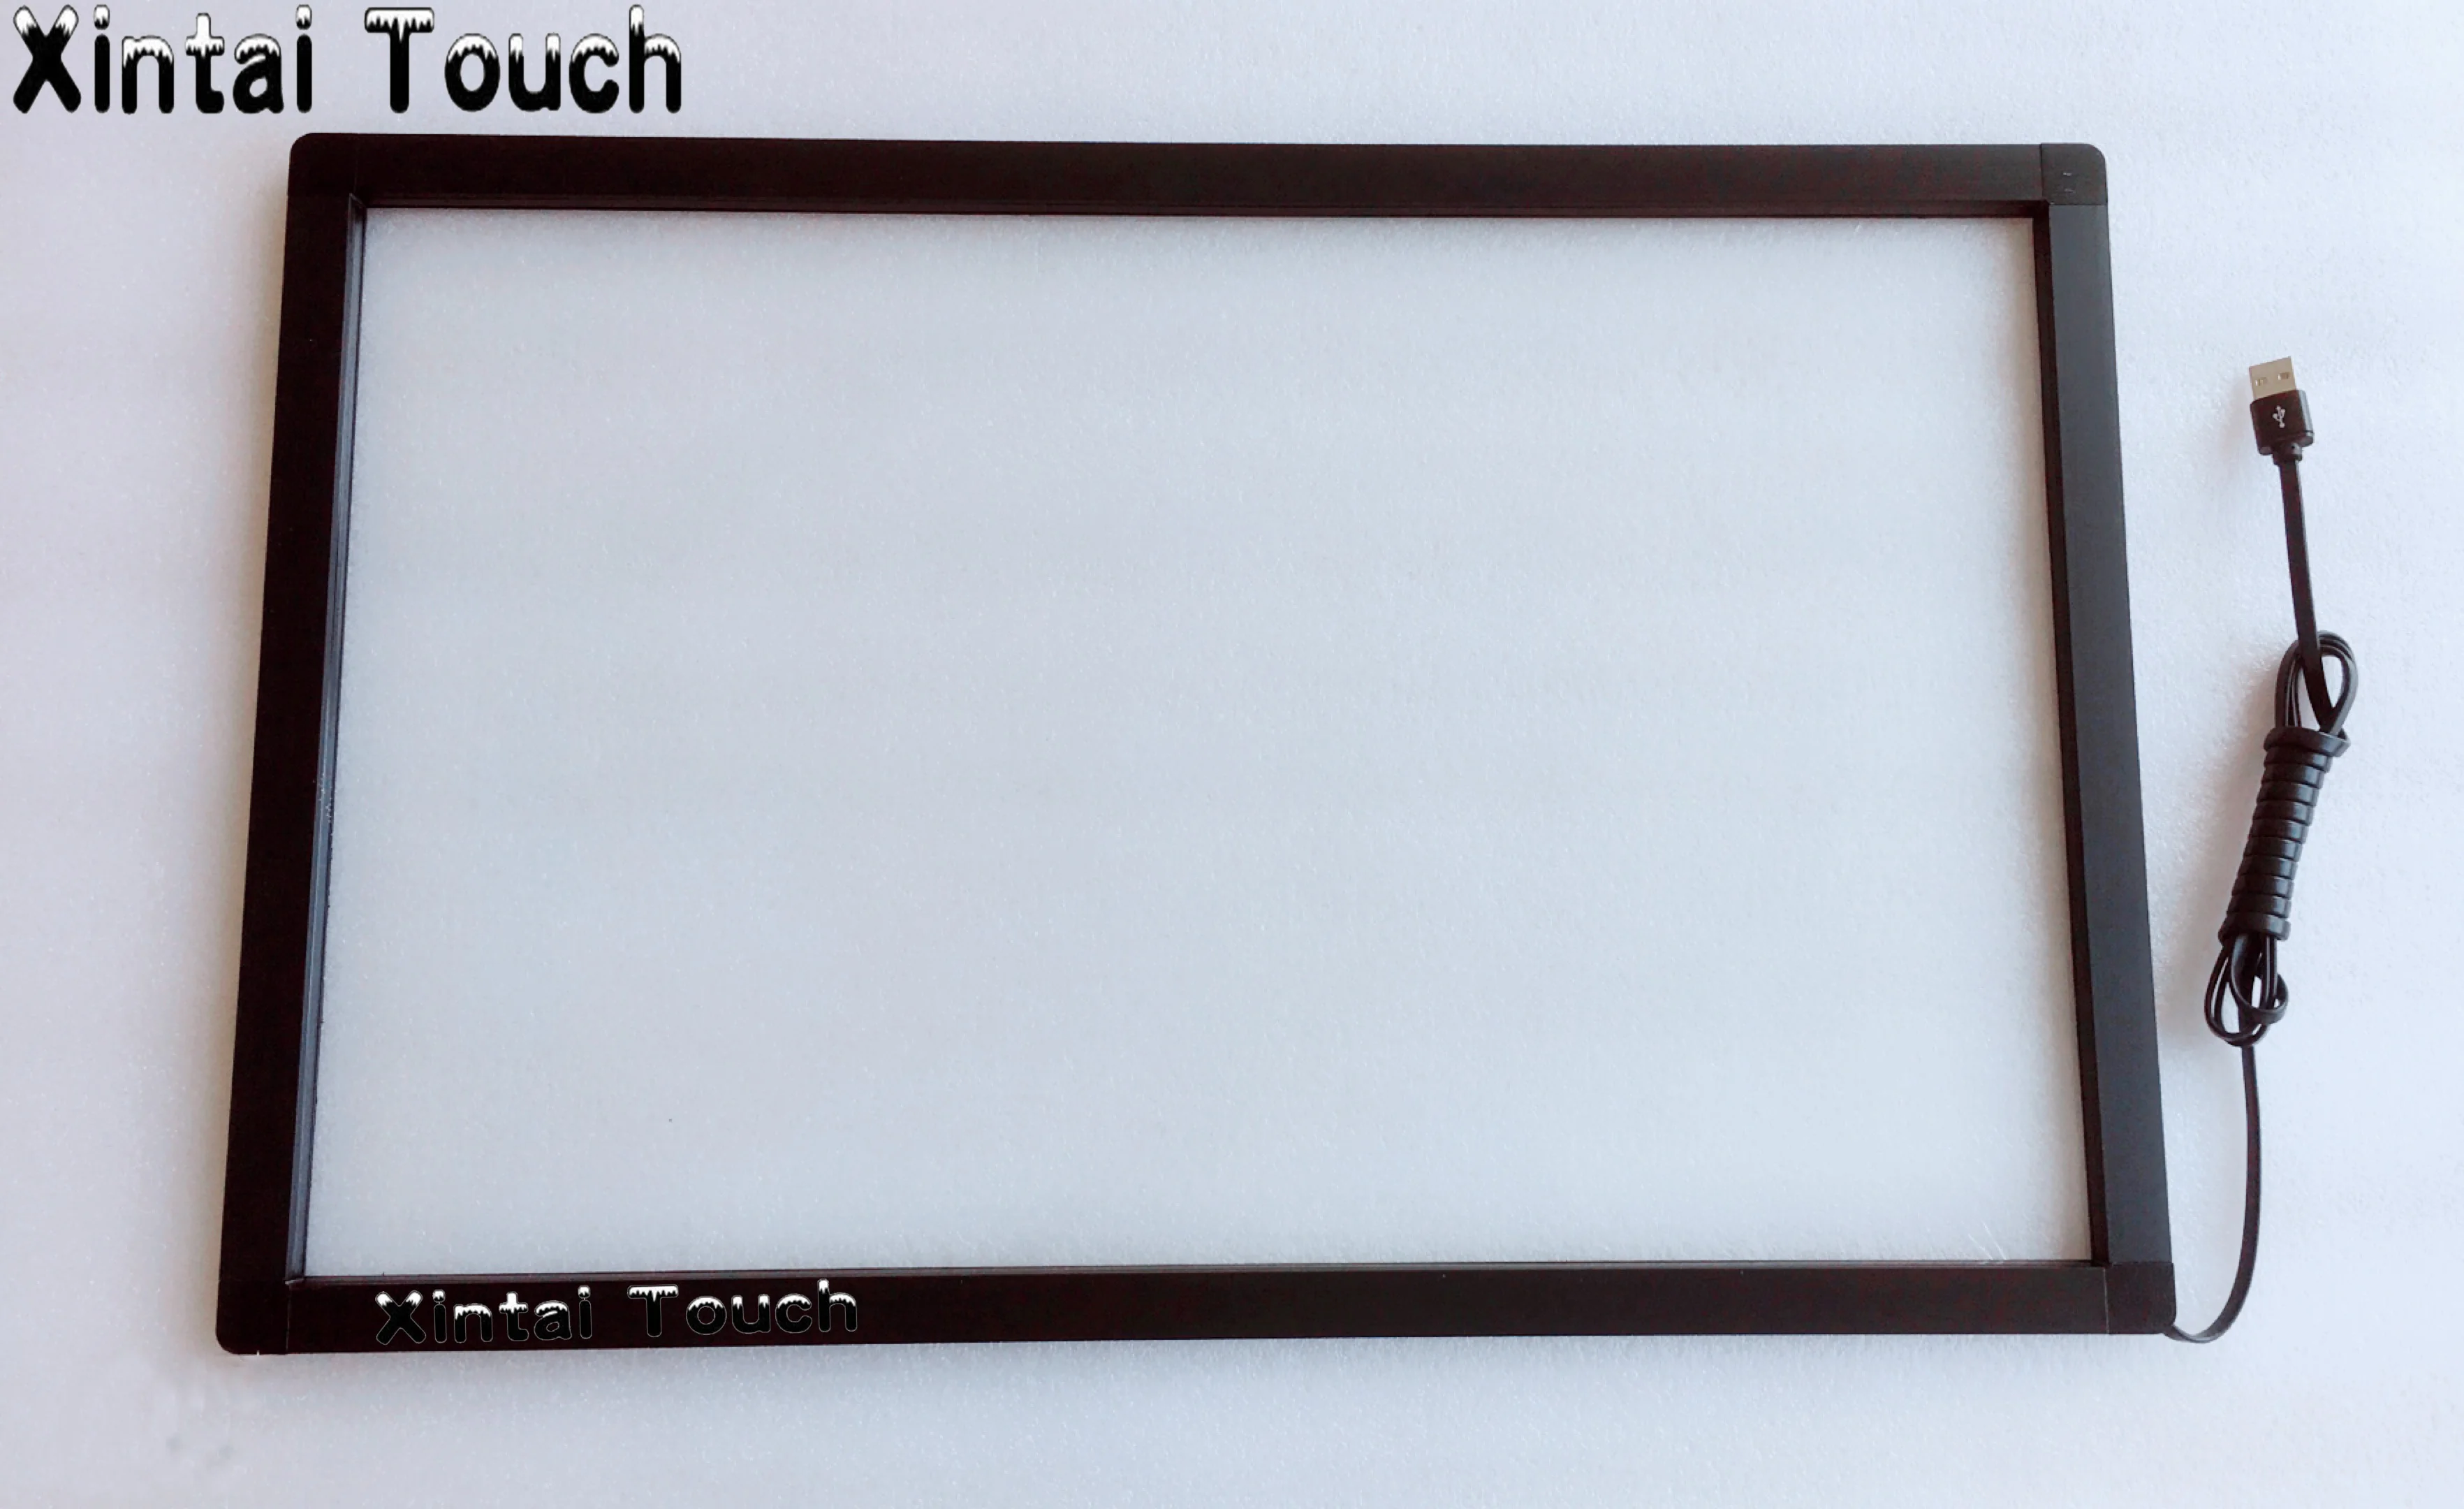 

Free Shipping! 32" USB Infrared Touch Screen, 10 points IR Multi Touch panel, IR Touch frame Overlay